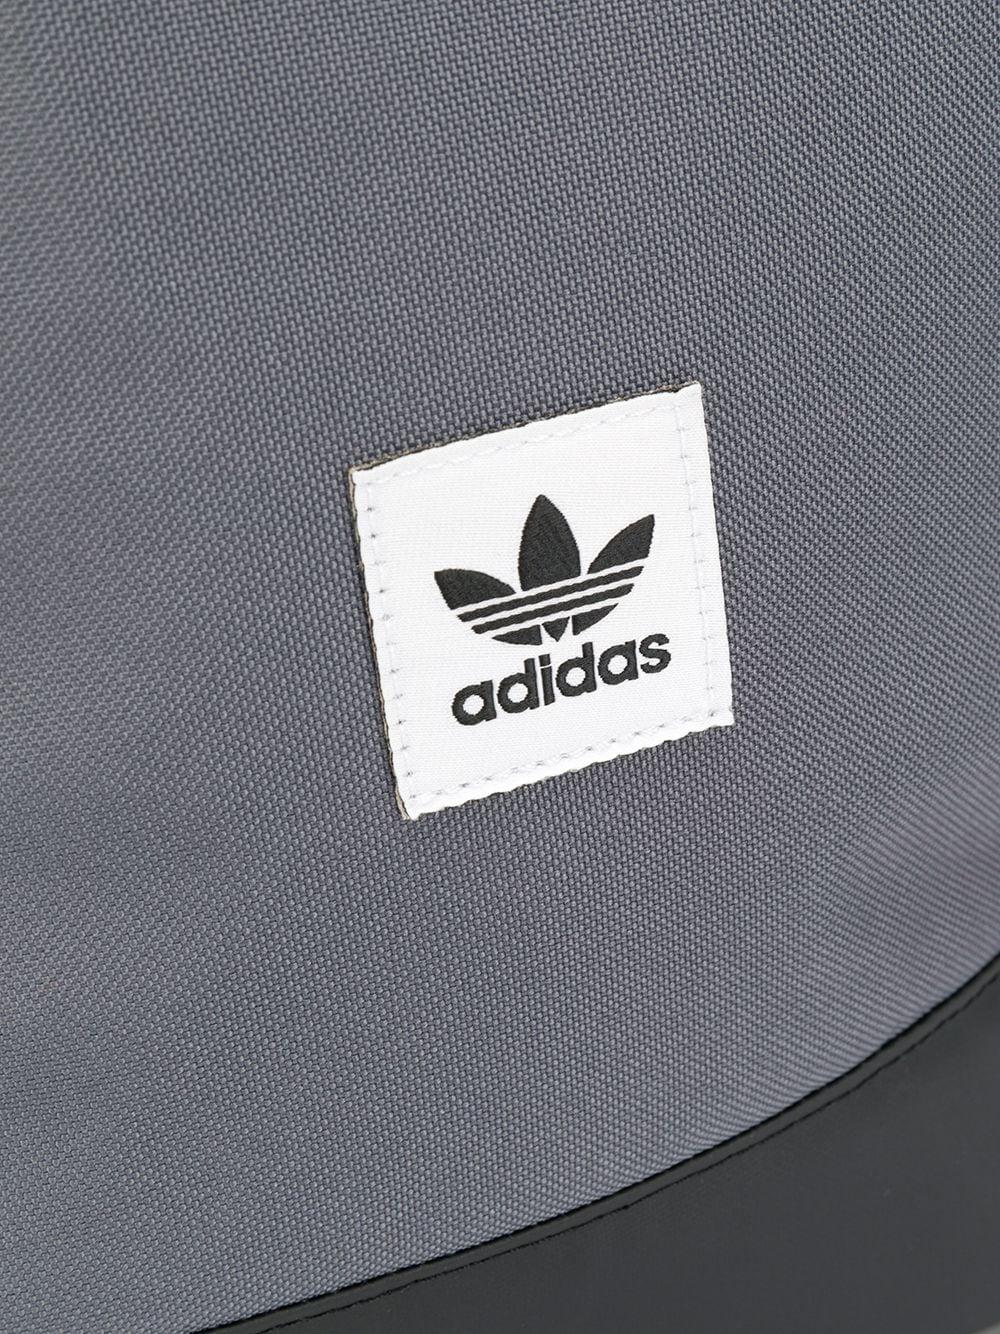 adidas Pe Rolltop Backpack in Grey (Gray) | Lyst